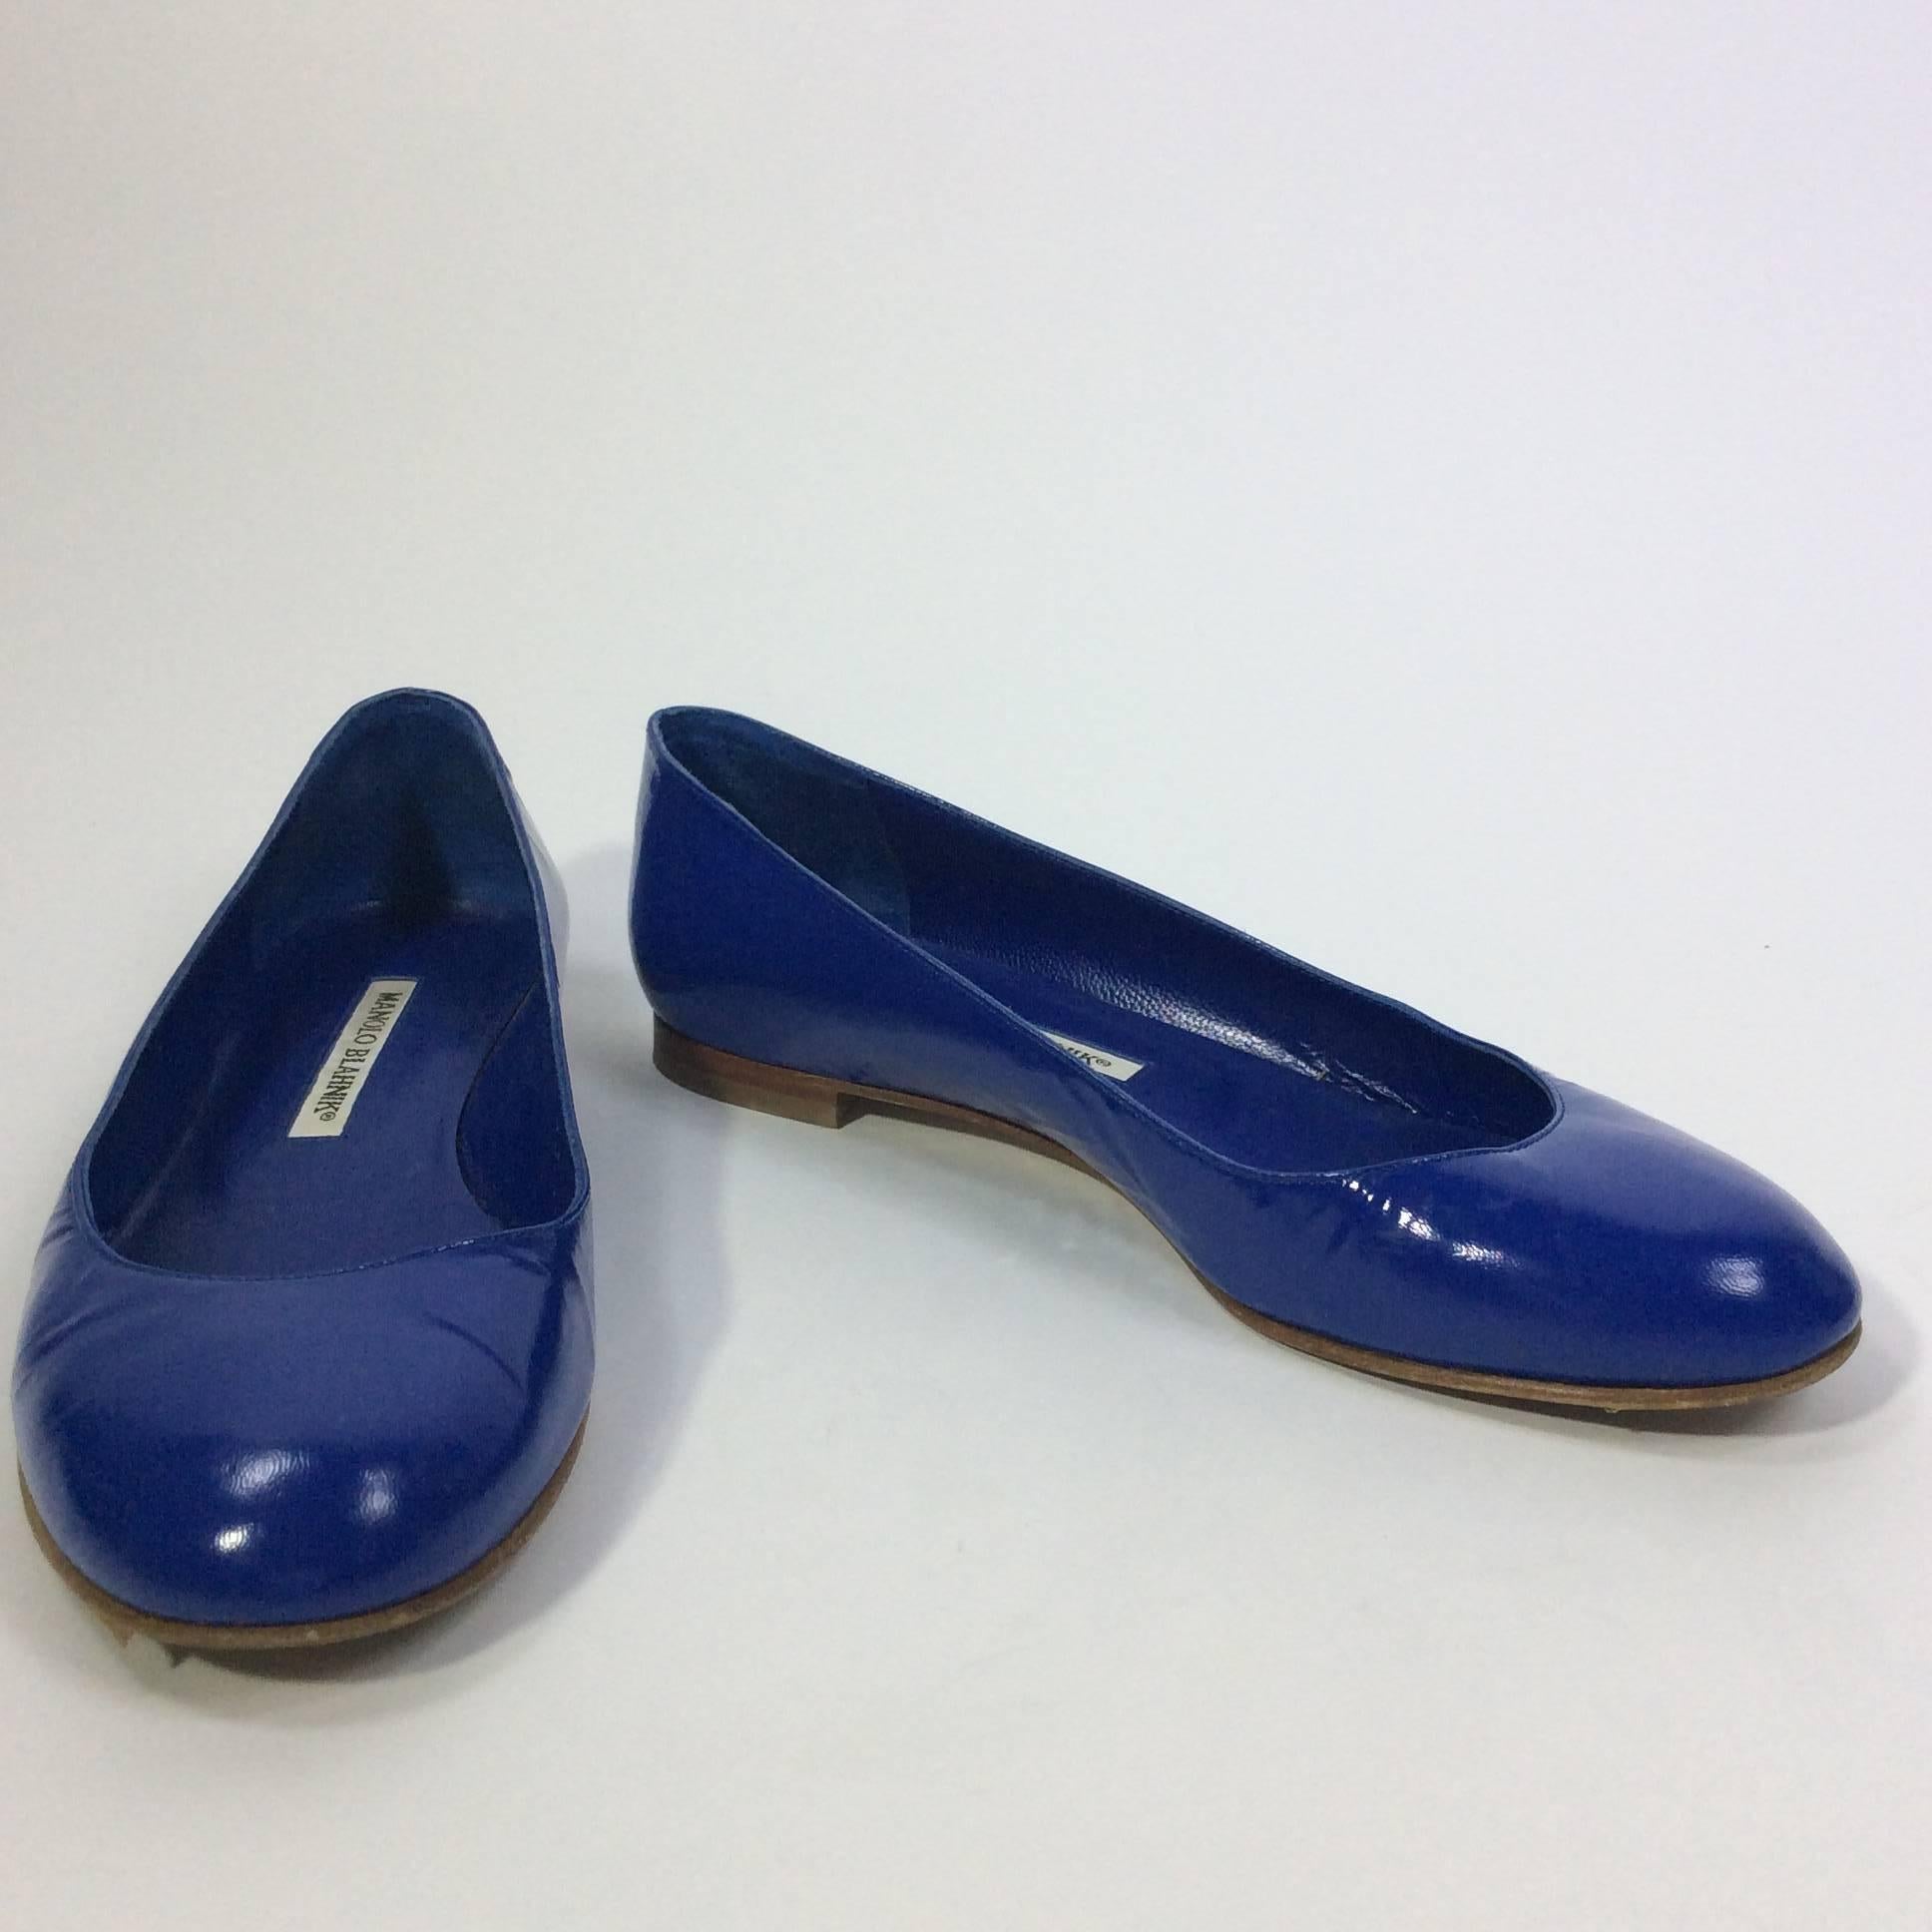 Royal Blue Leather Flat
0.5 inch heel
3.25 inch sole width
Rounded toe
Size 38.5 (equates to US 8.5)
Wooden sole, patent leather upper, leather lining